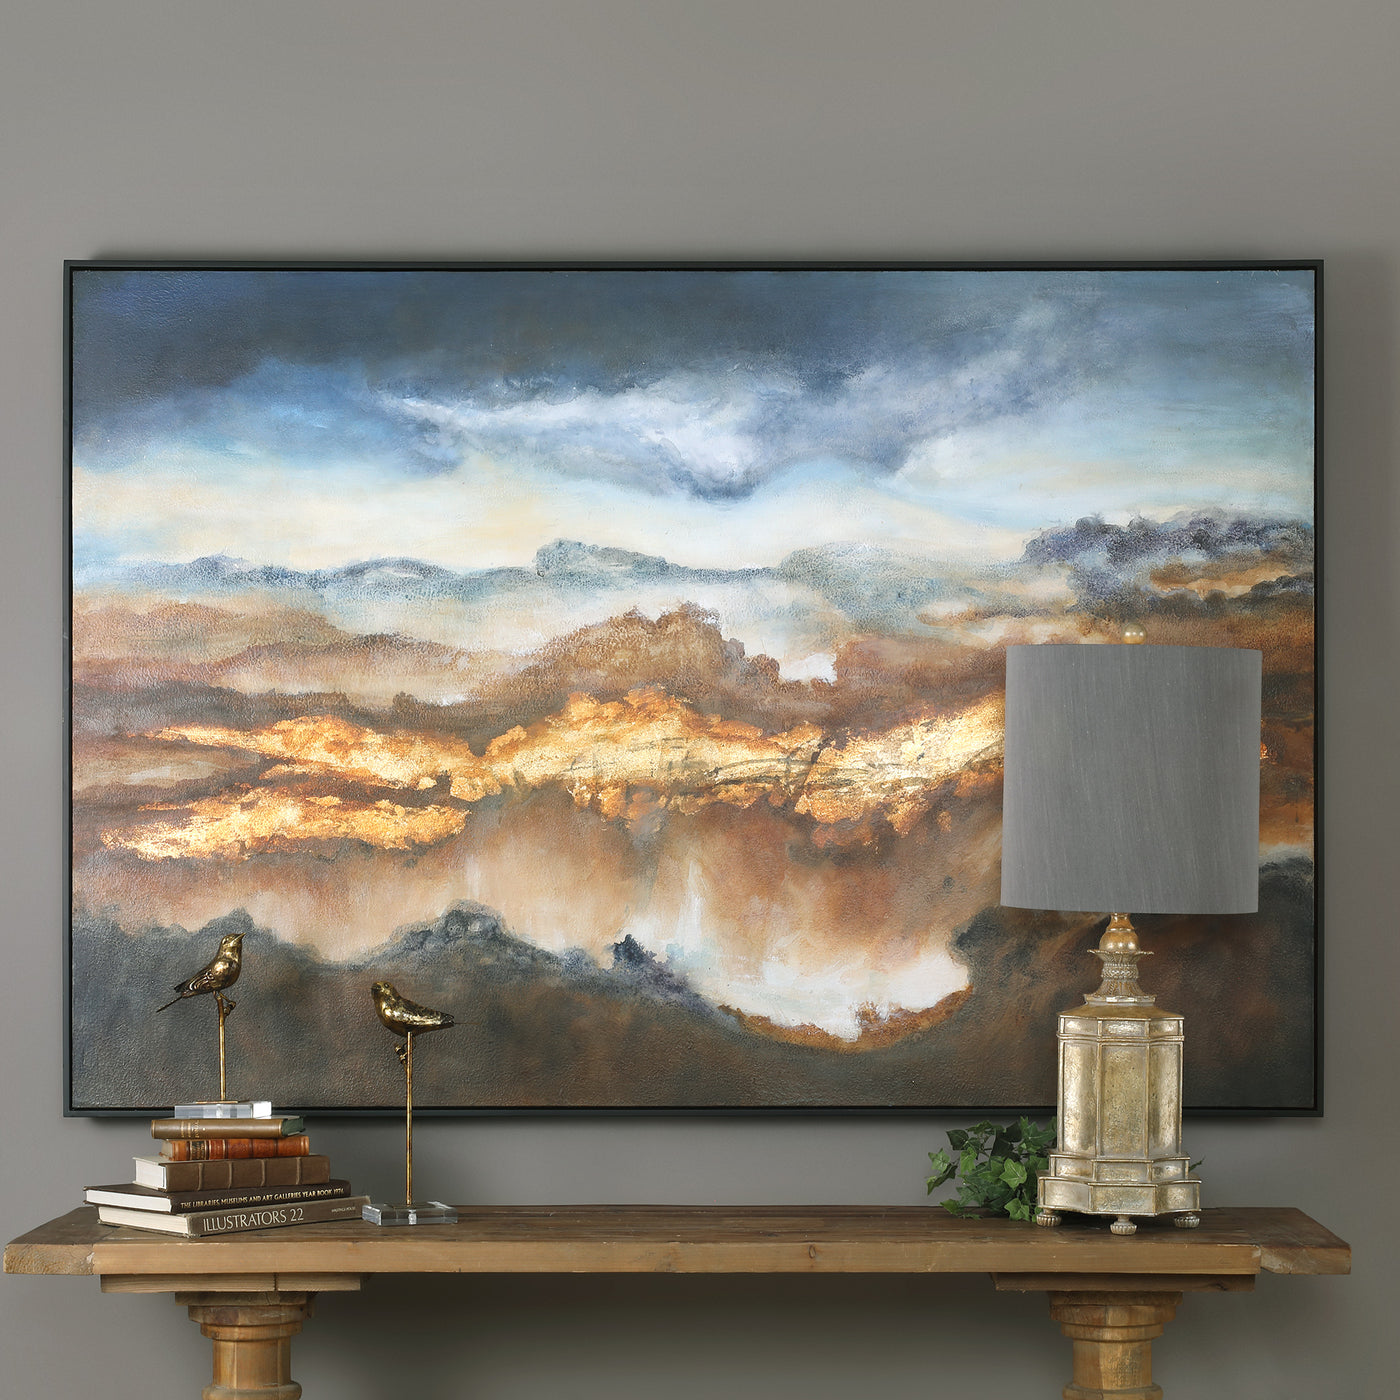 Rich Earth Tone Colors Combined With Brilliant Blue Shades Are Used To Create This Hand Painted Landscape On Canvas. This ...